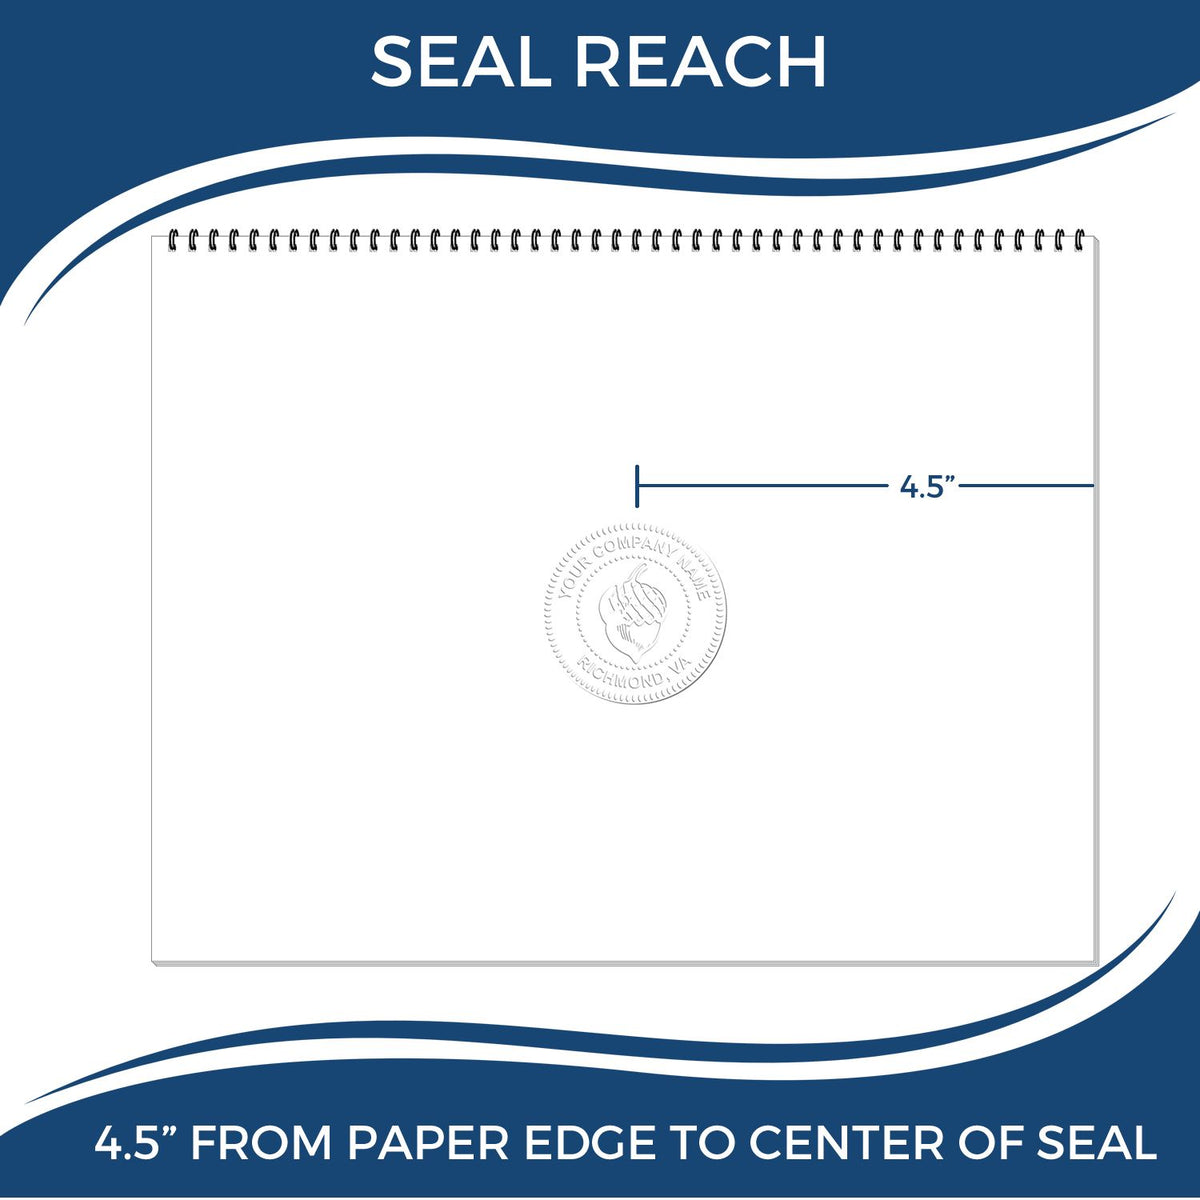 An infographic showing the seal reach which is represented by a ruler and a miniature seal image of the Extended Long Reach West Virginia Architect Seal Embosser